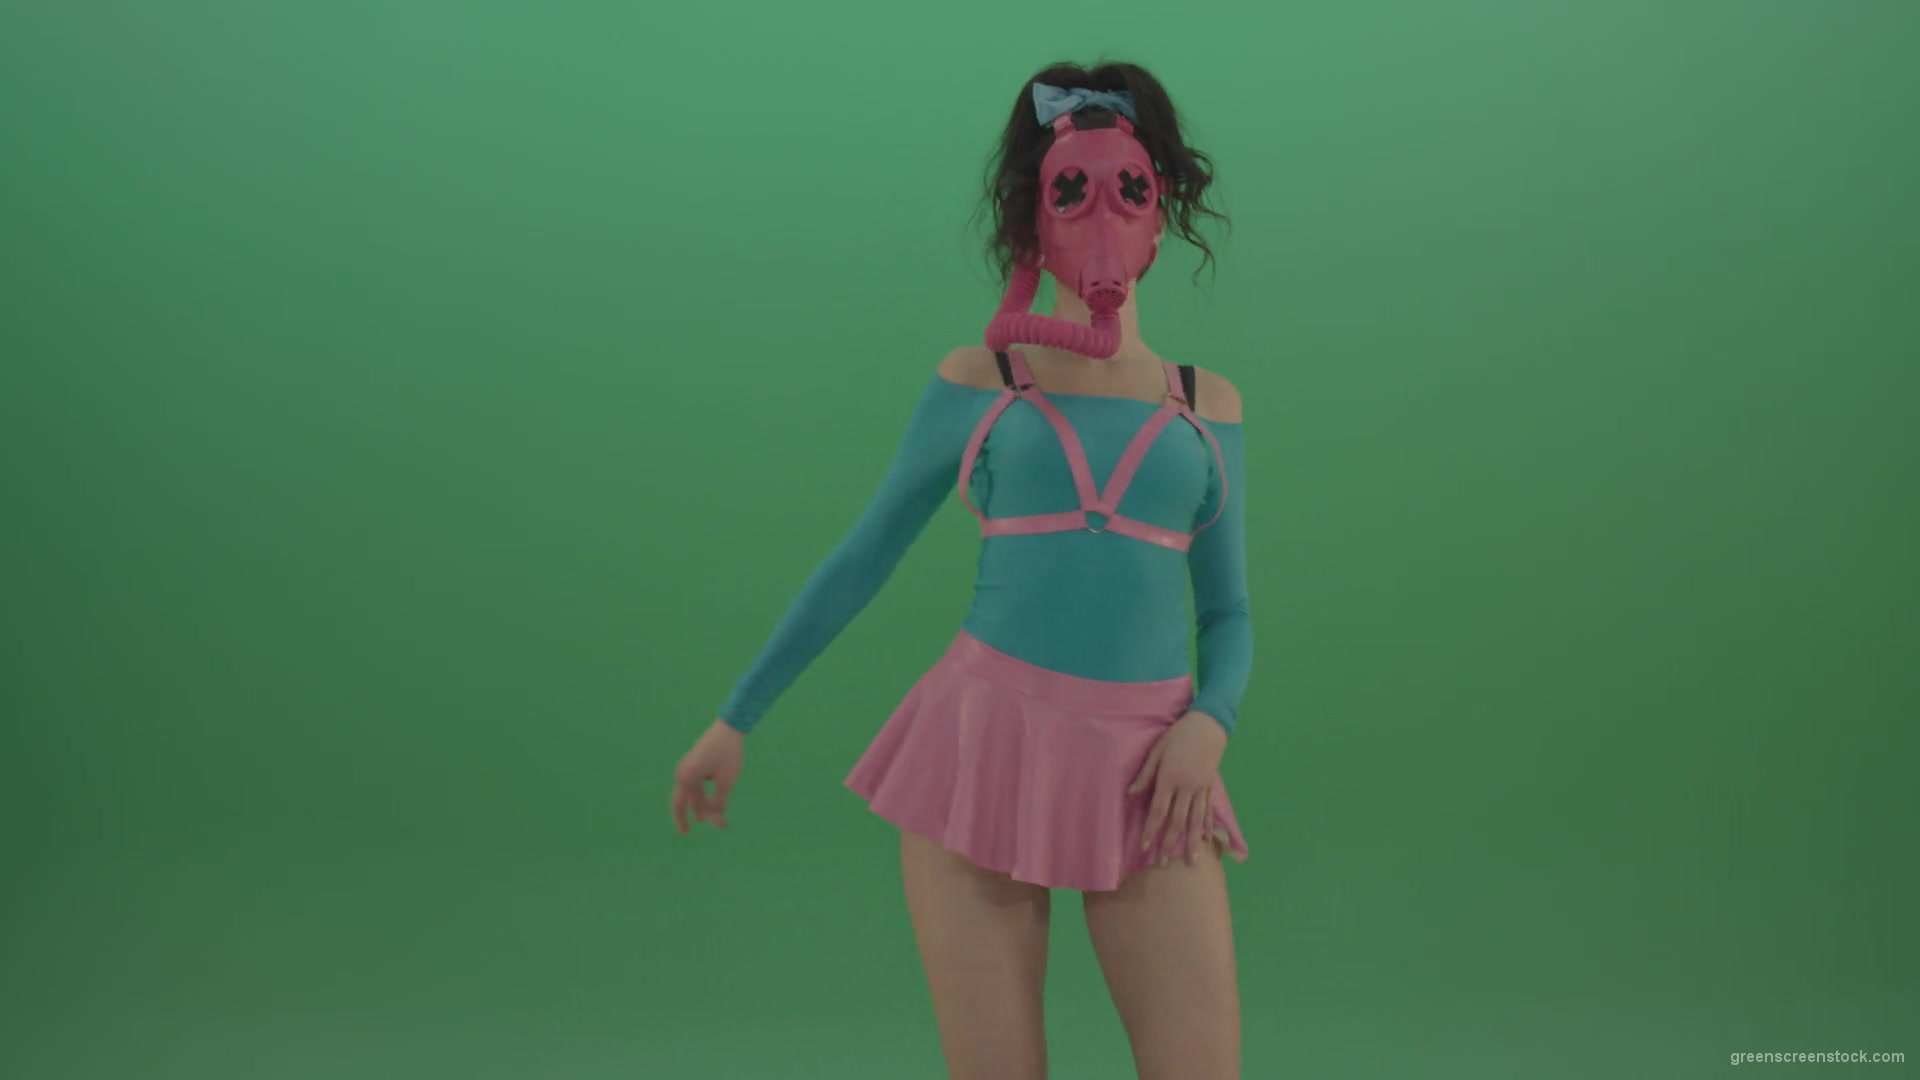 Go-Go-Dancing-Woman-in-Pink-Gas-Mask-sexy-moving-on-green-screen-4K-Video-Footage-1920_004 Green Screen Stock